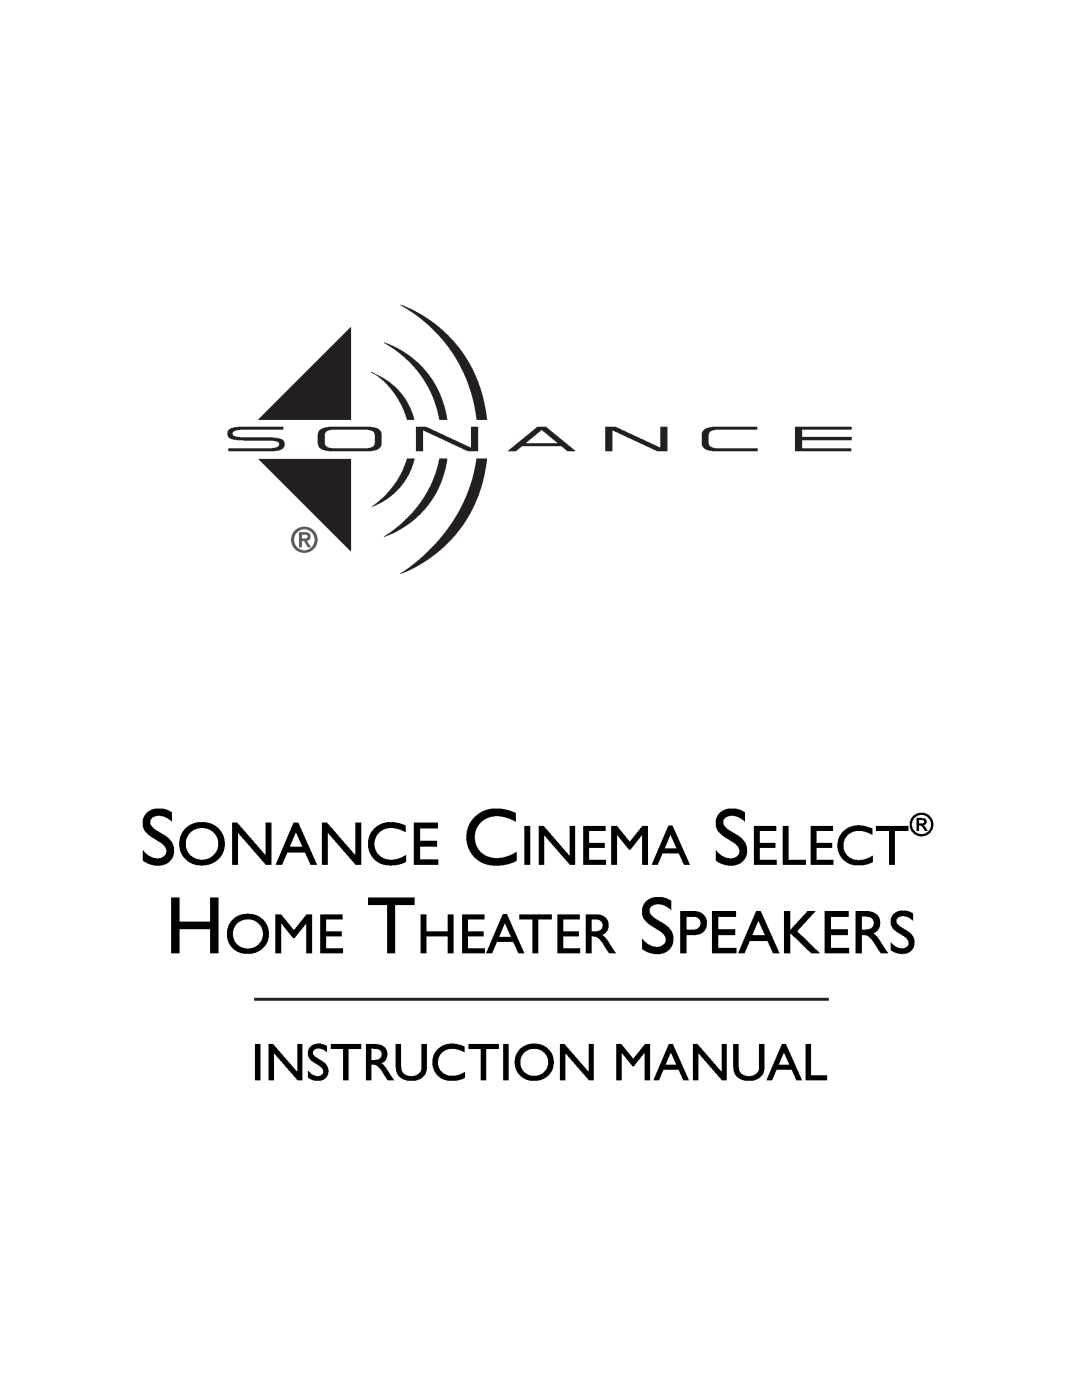 Sonance HOME THEATER SPEAKERS instruction manual Sonance Cinema Select Home Theater Speakers 